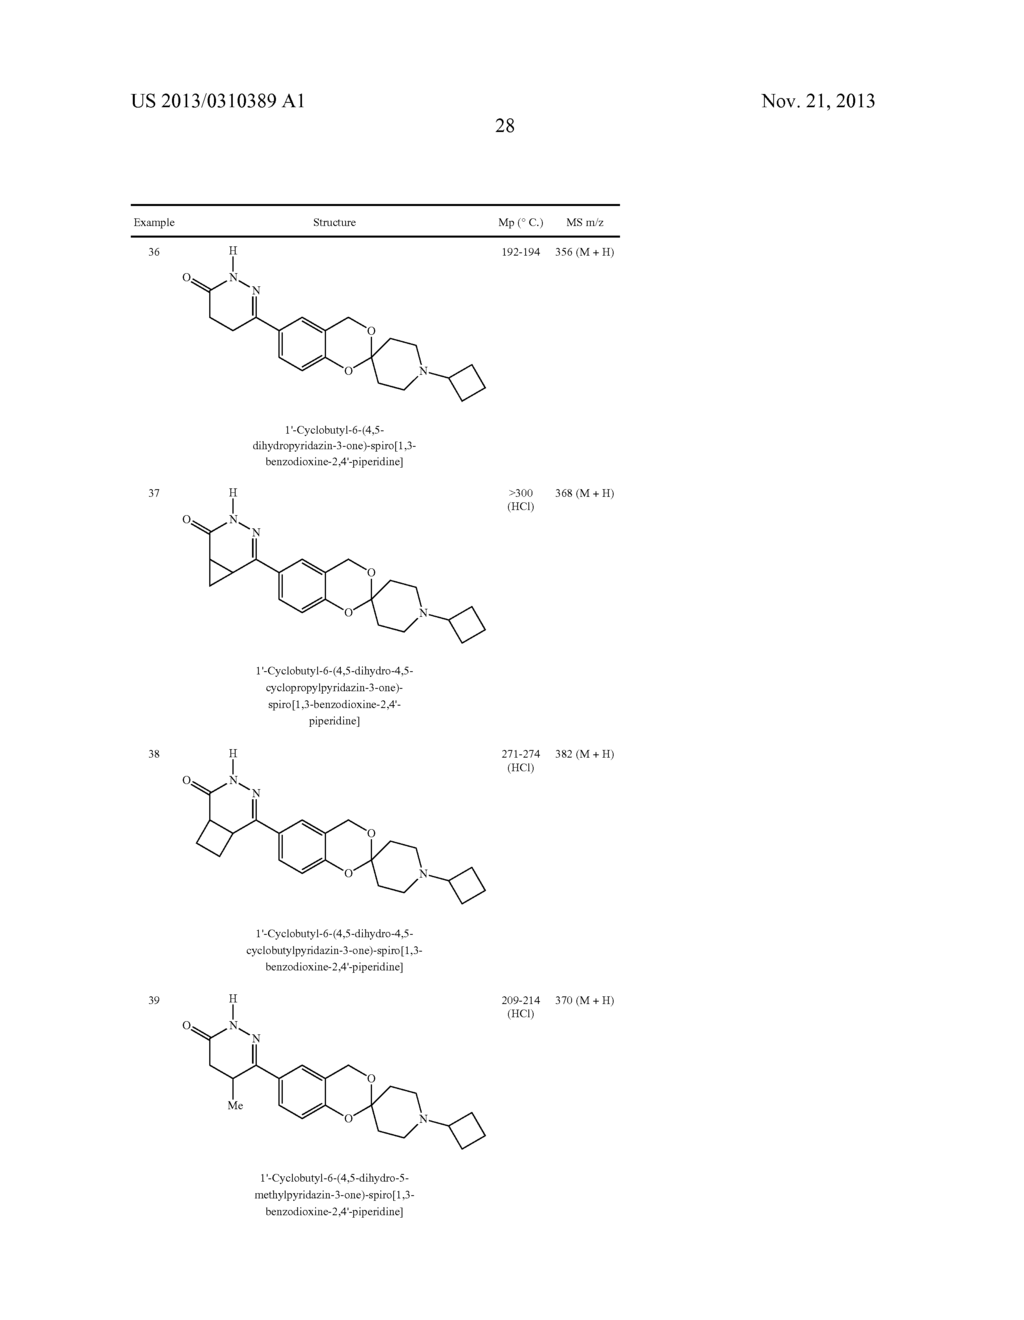 SUBSTITUTED SPIROCYCLIC PIPERIDINE DERIVATIVES AS HISTAMINE-3 (H3)     RECEPTOR LIGANDS - diagram, schematic, and image 29